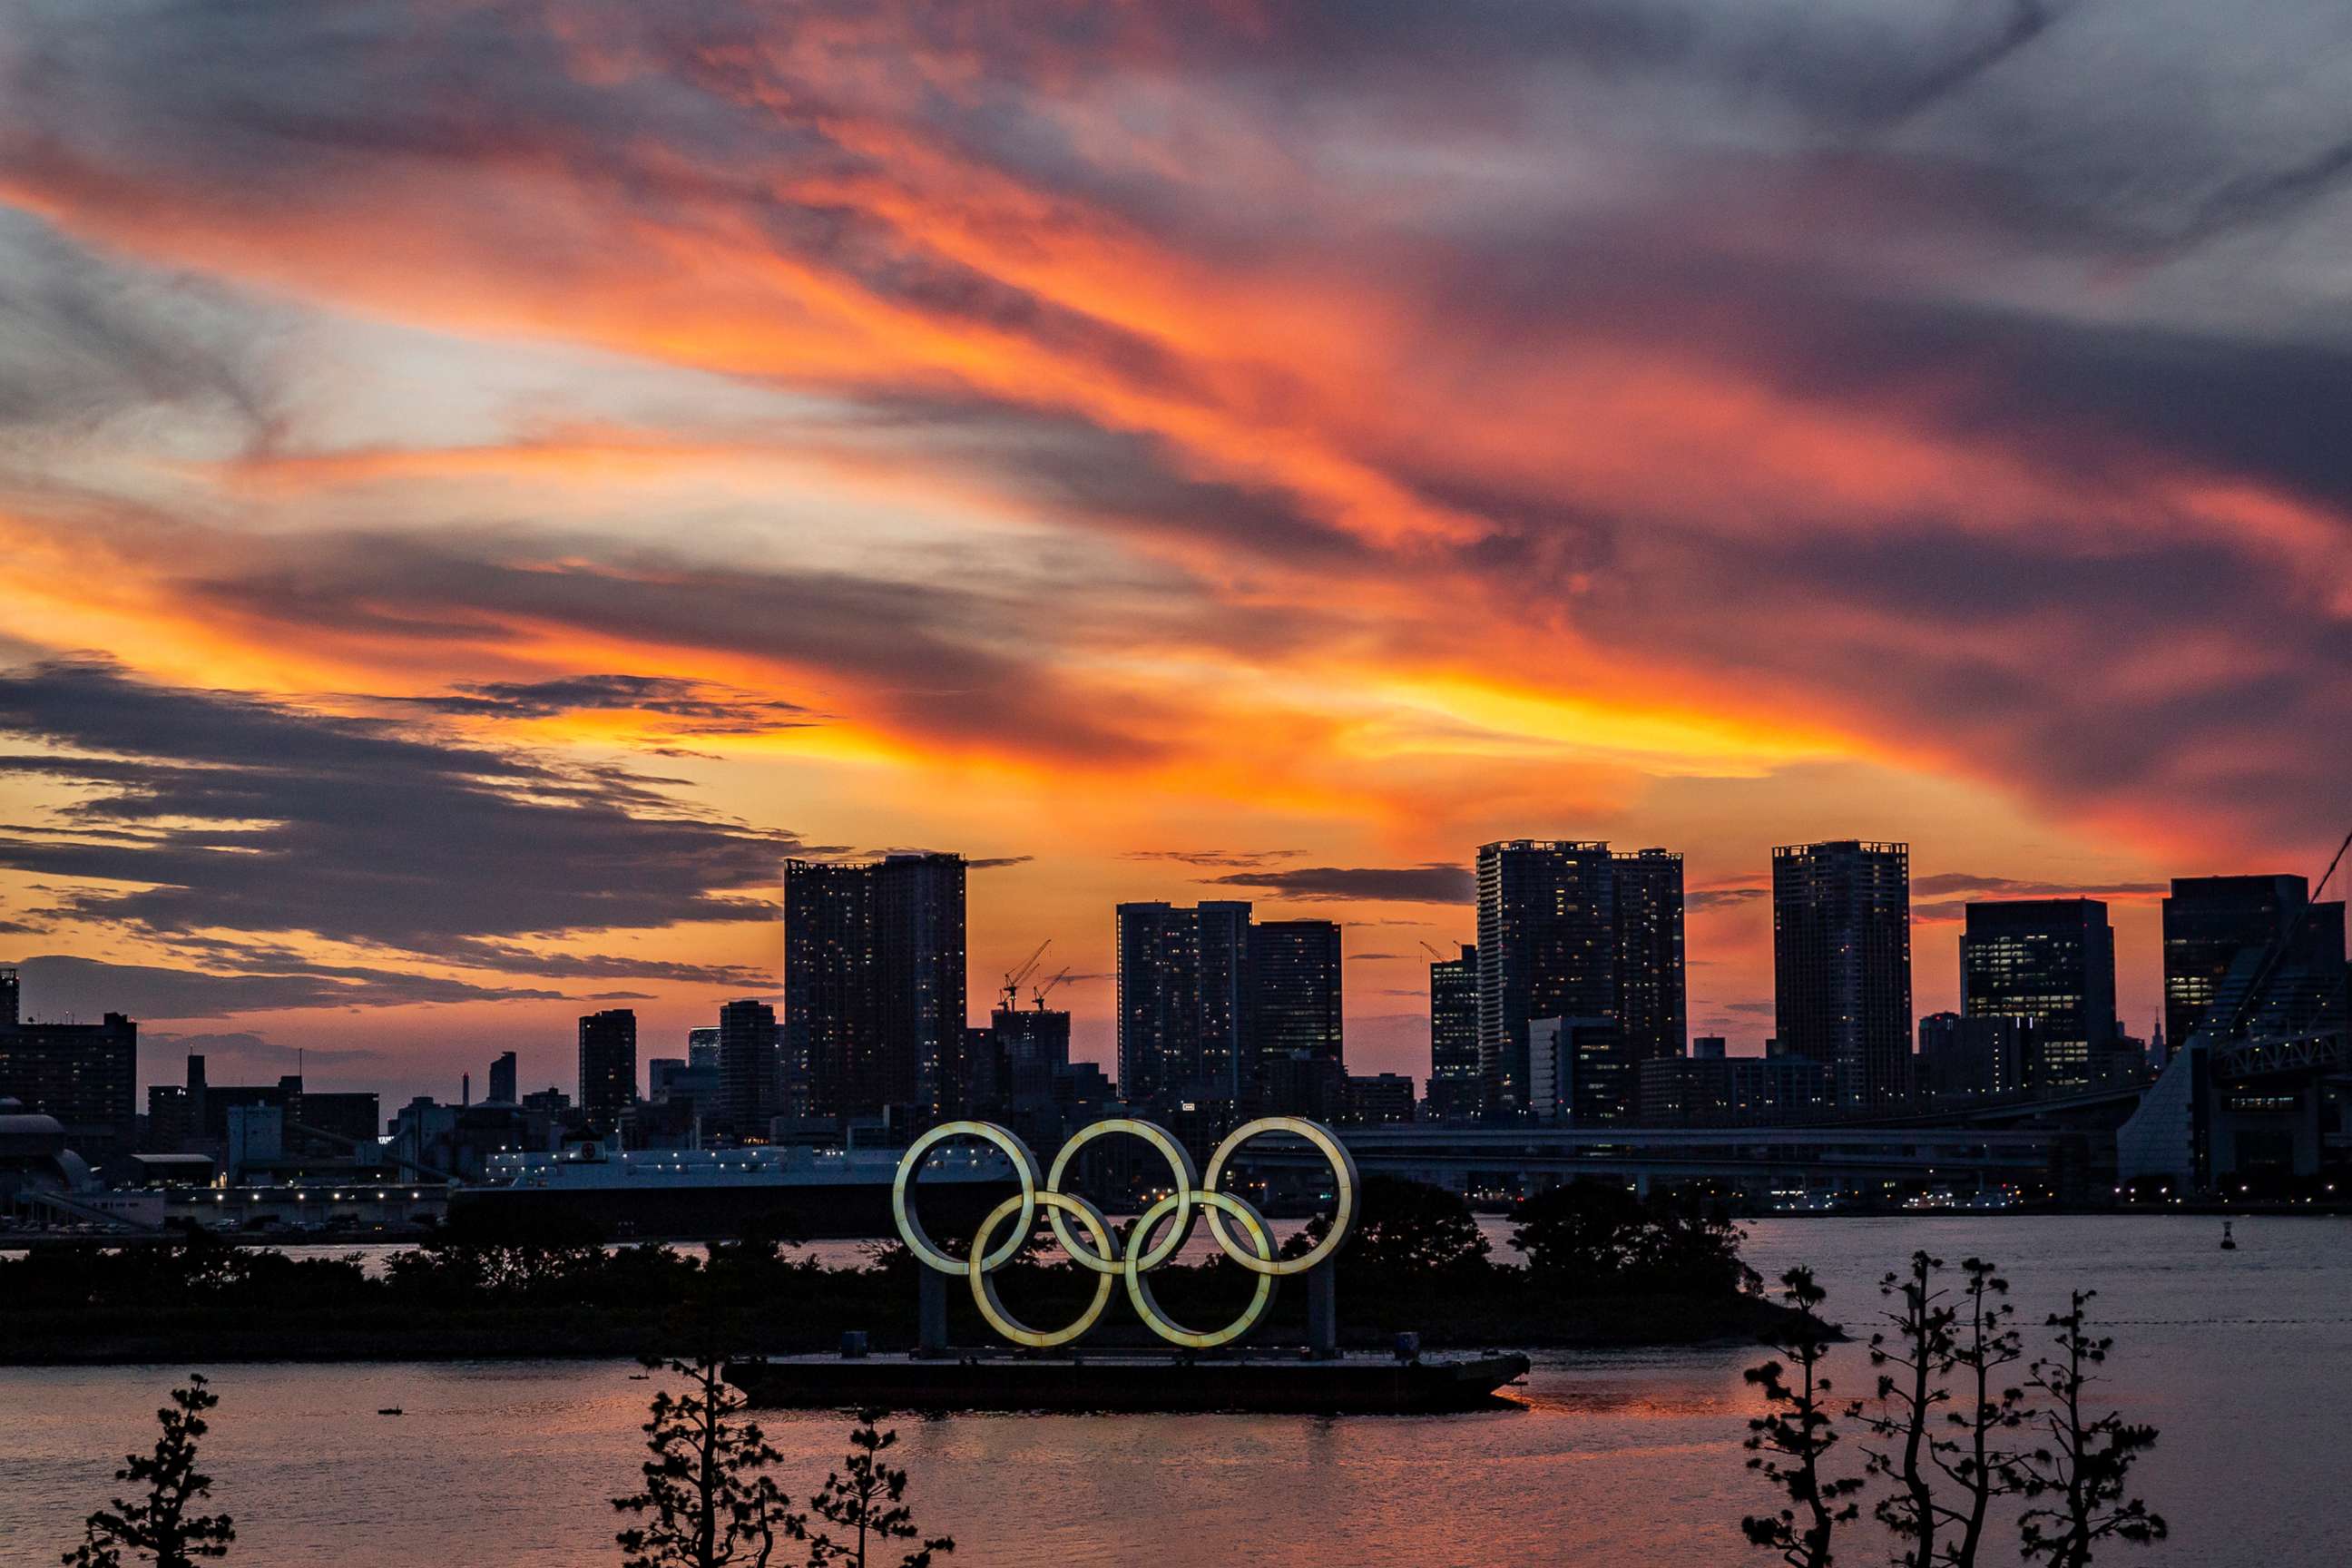 PHOTO: Olympics rings are seen at sunset on July 21, 2021 in Tokyo.